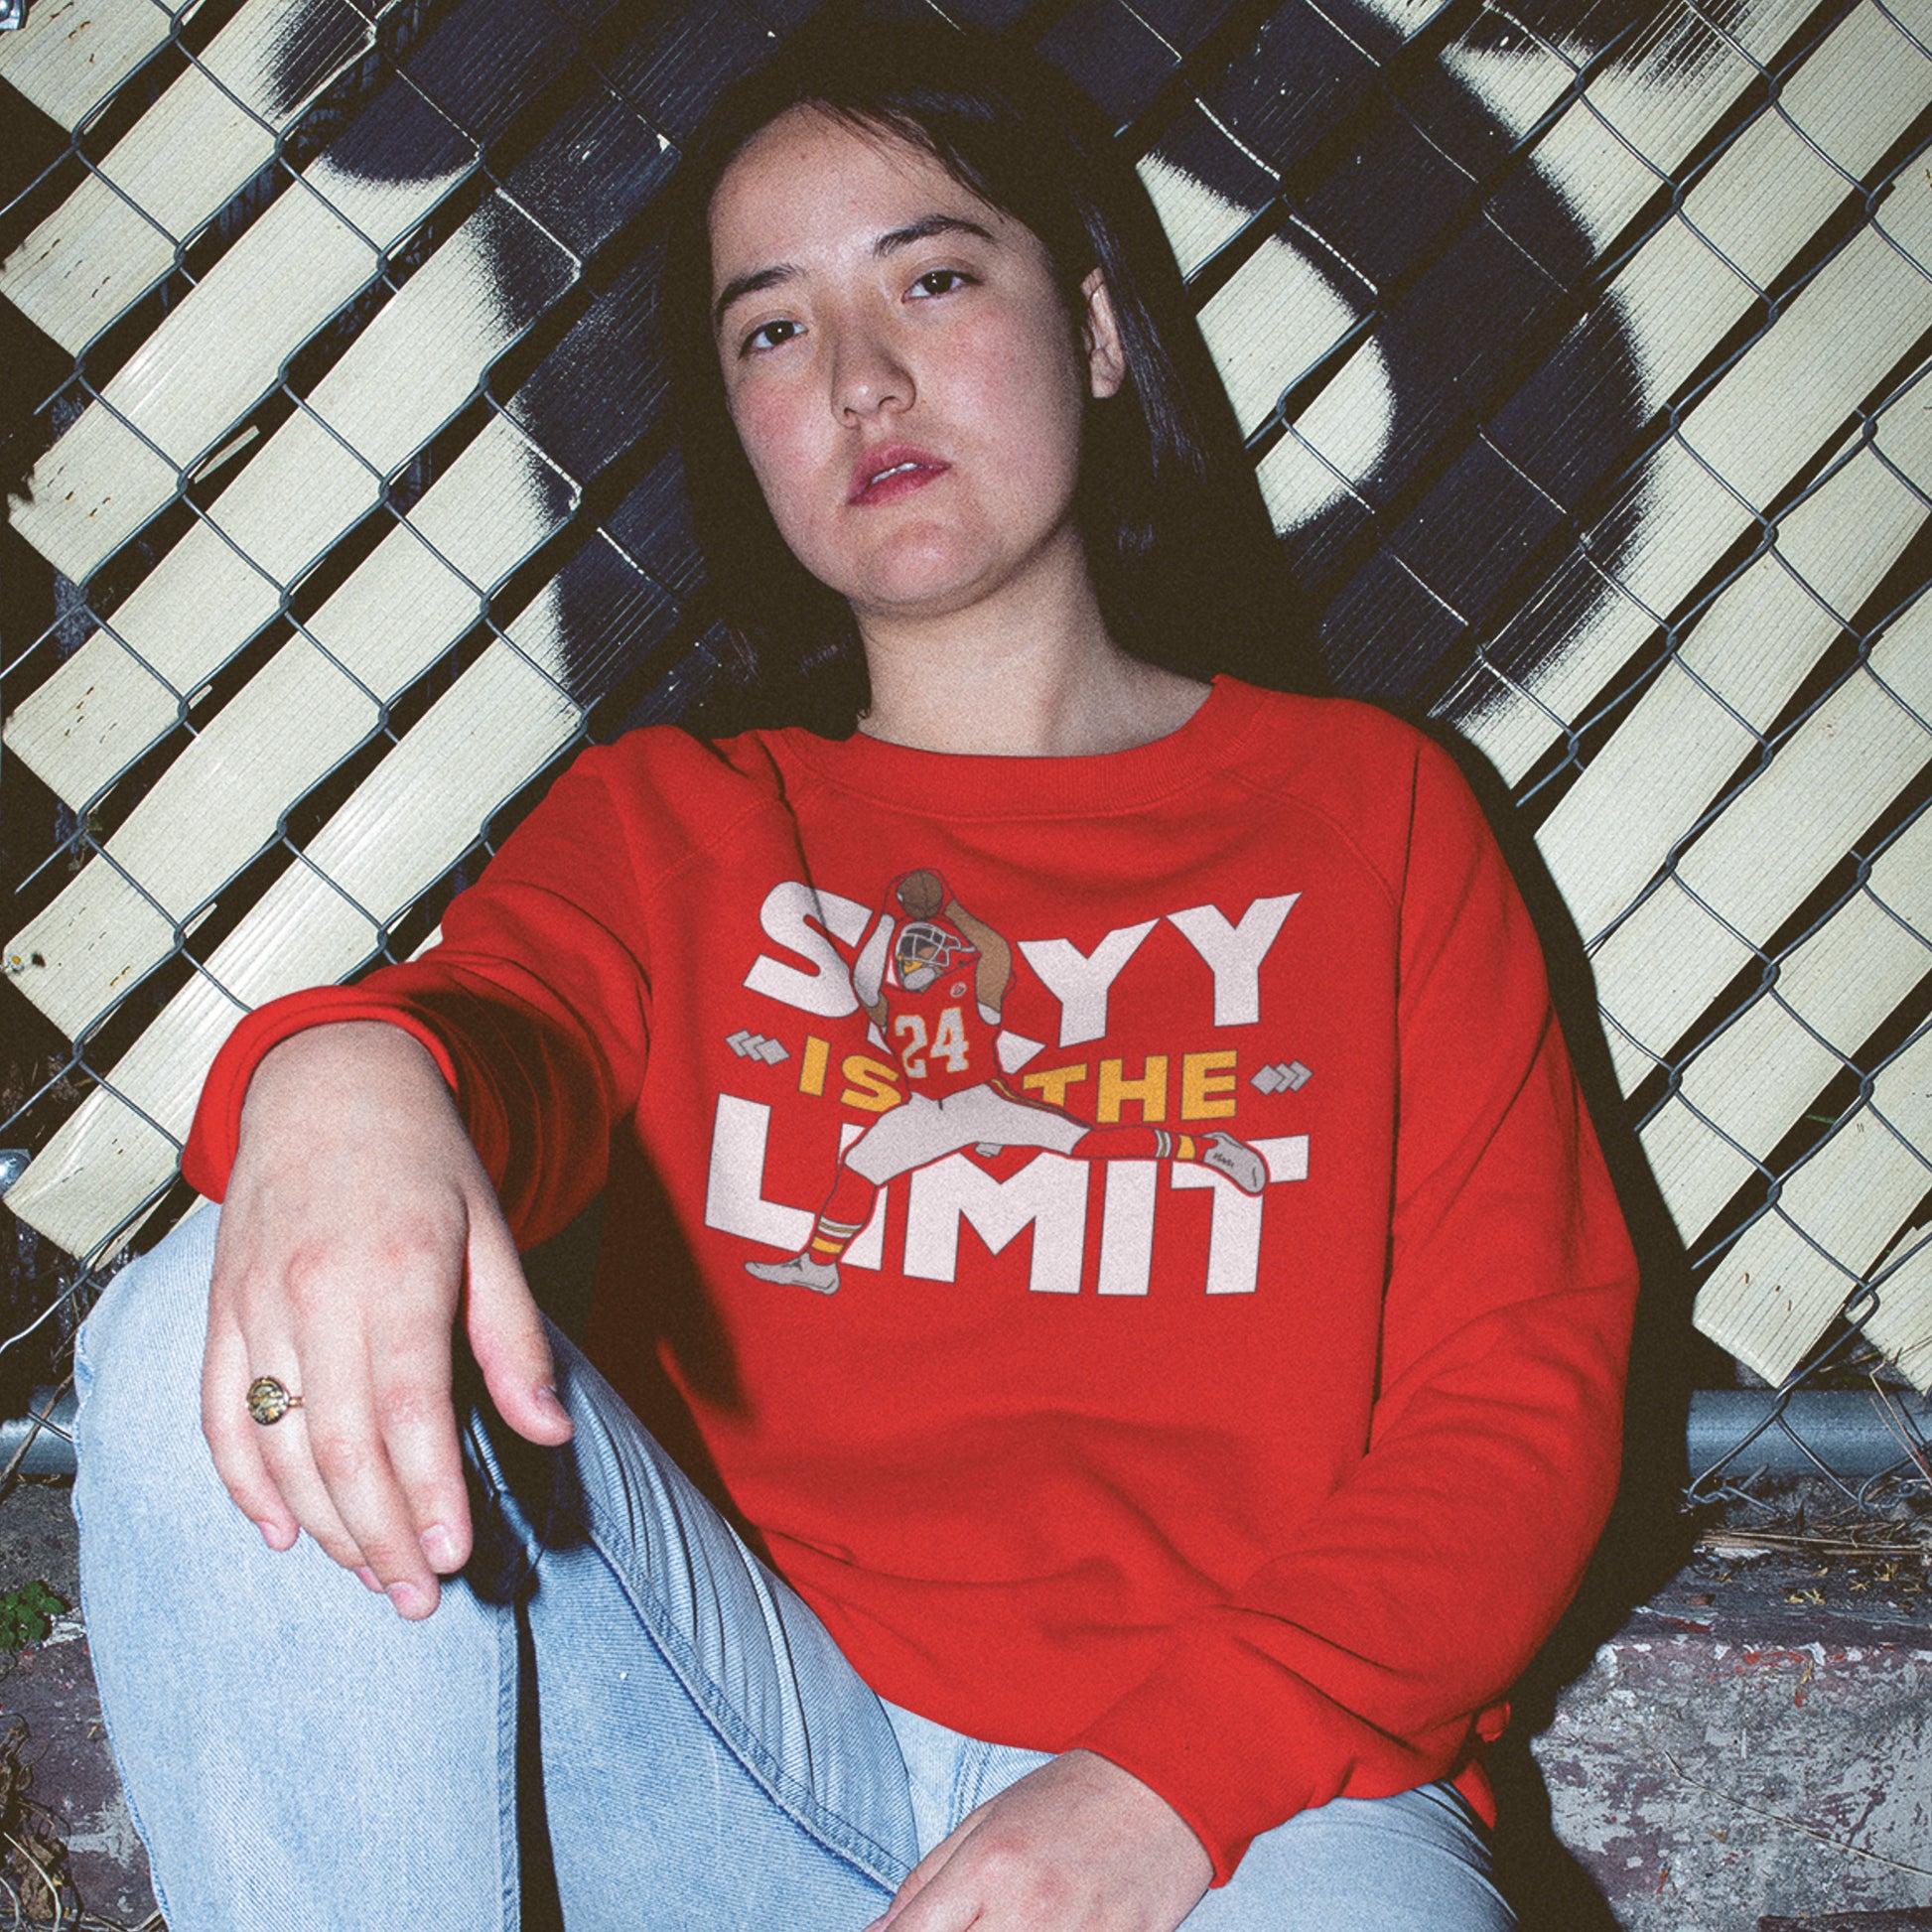 KC Swag Kansas City Chiefs White & Gold Skyy Is The Limit (with football player) on a Red Crewneck Sweatshirt worn by a female model sitting against a chainlink fence in front of a graffitied wall